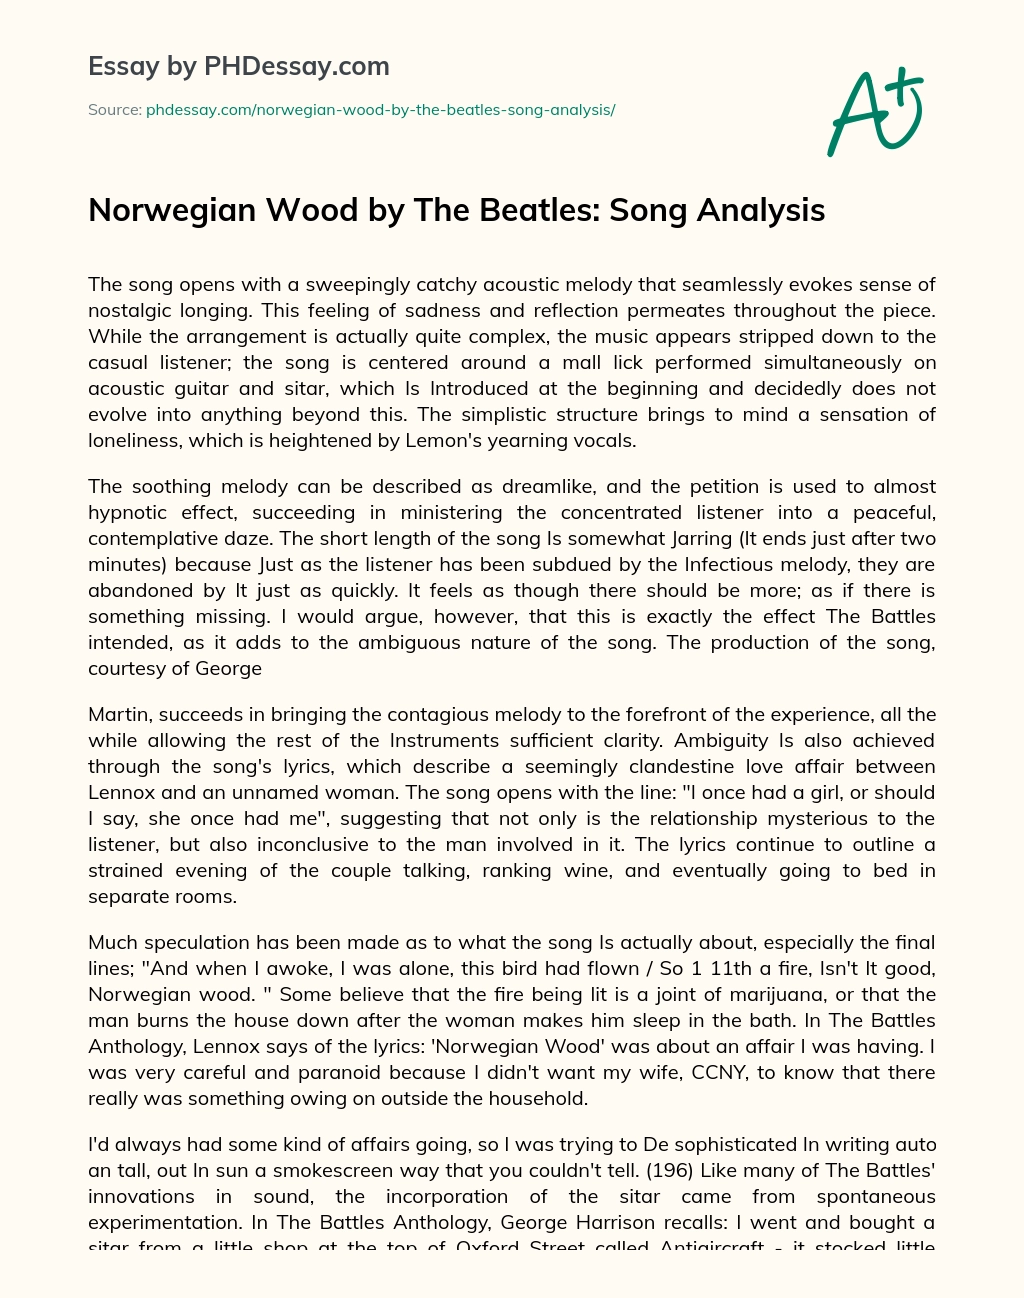 Norwegian Wood by The Beatles: Song Analysis essay